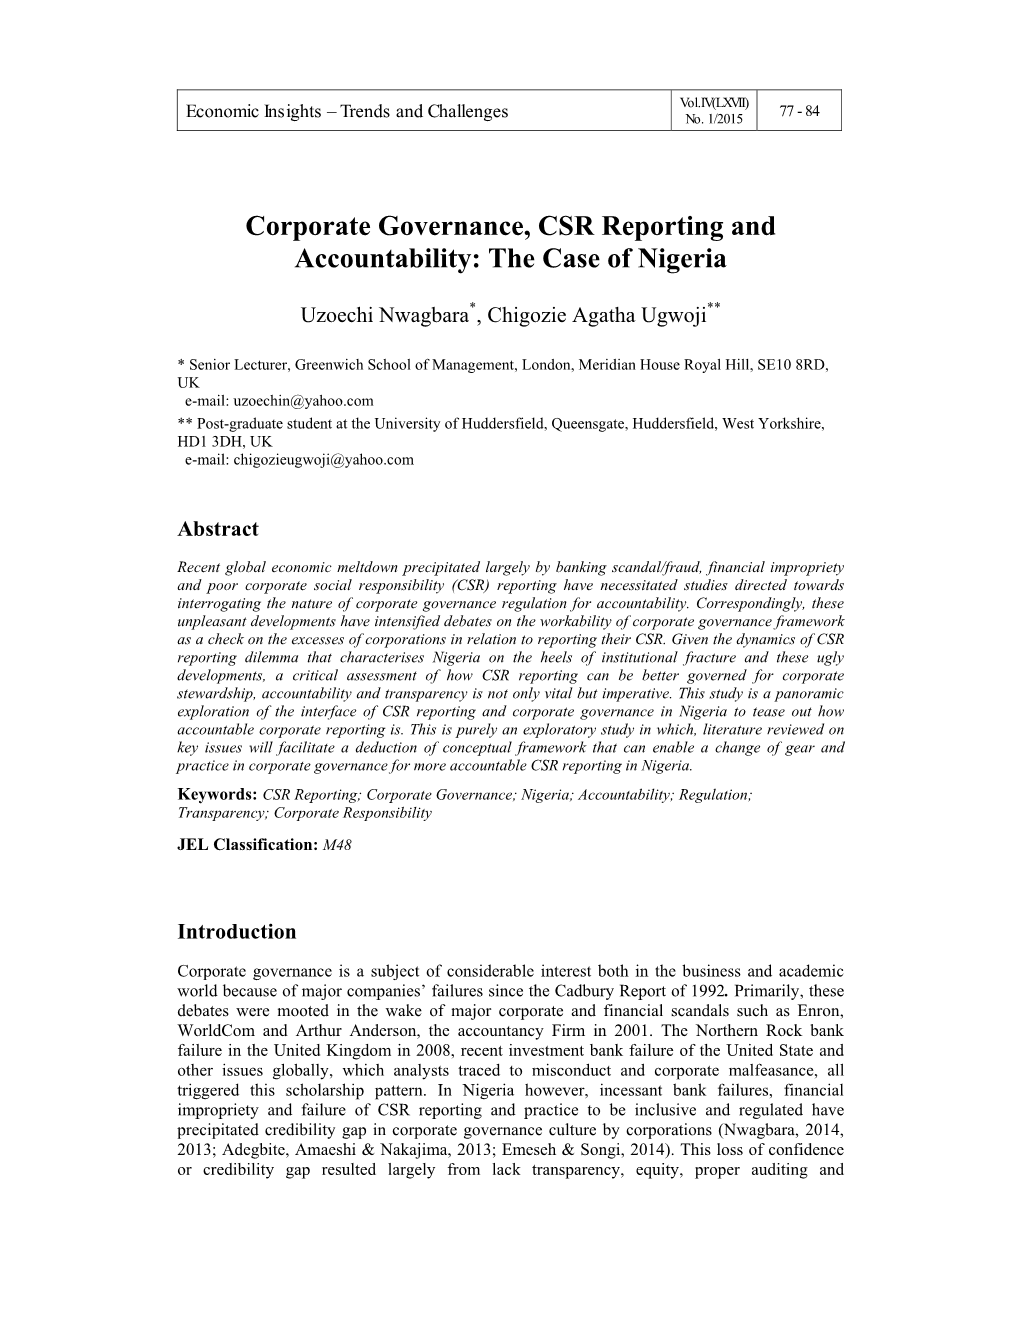 Corporate Governance, CSR Reporting and Accountability: the Case of Nigeria